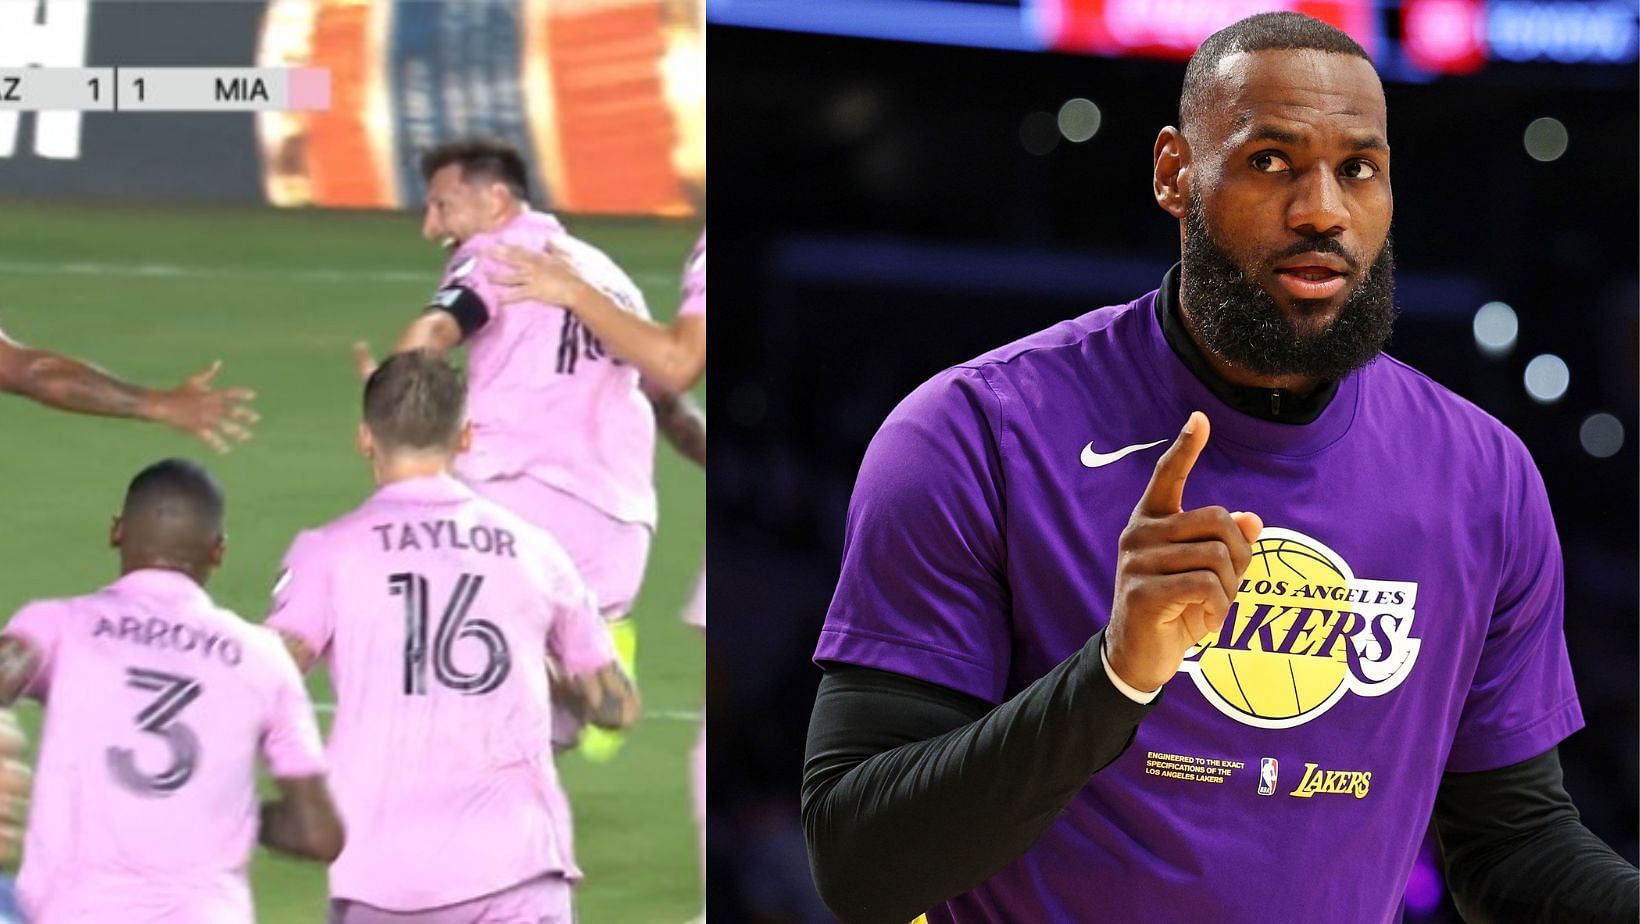 LeBron James congratulated Lionel Messi for scoring the winning goal in his MLS debut with Inter Miami.